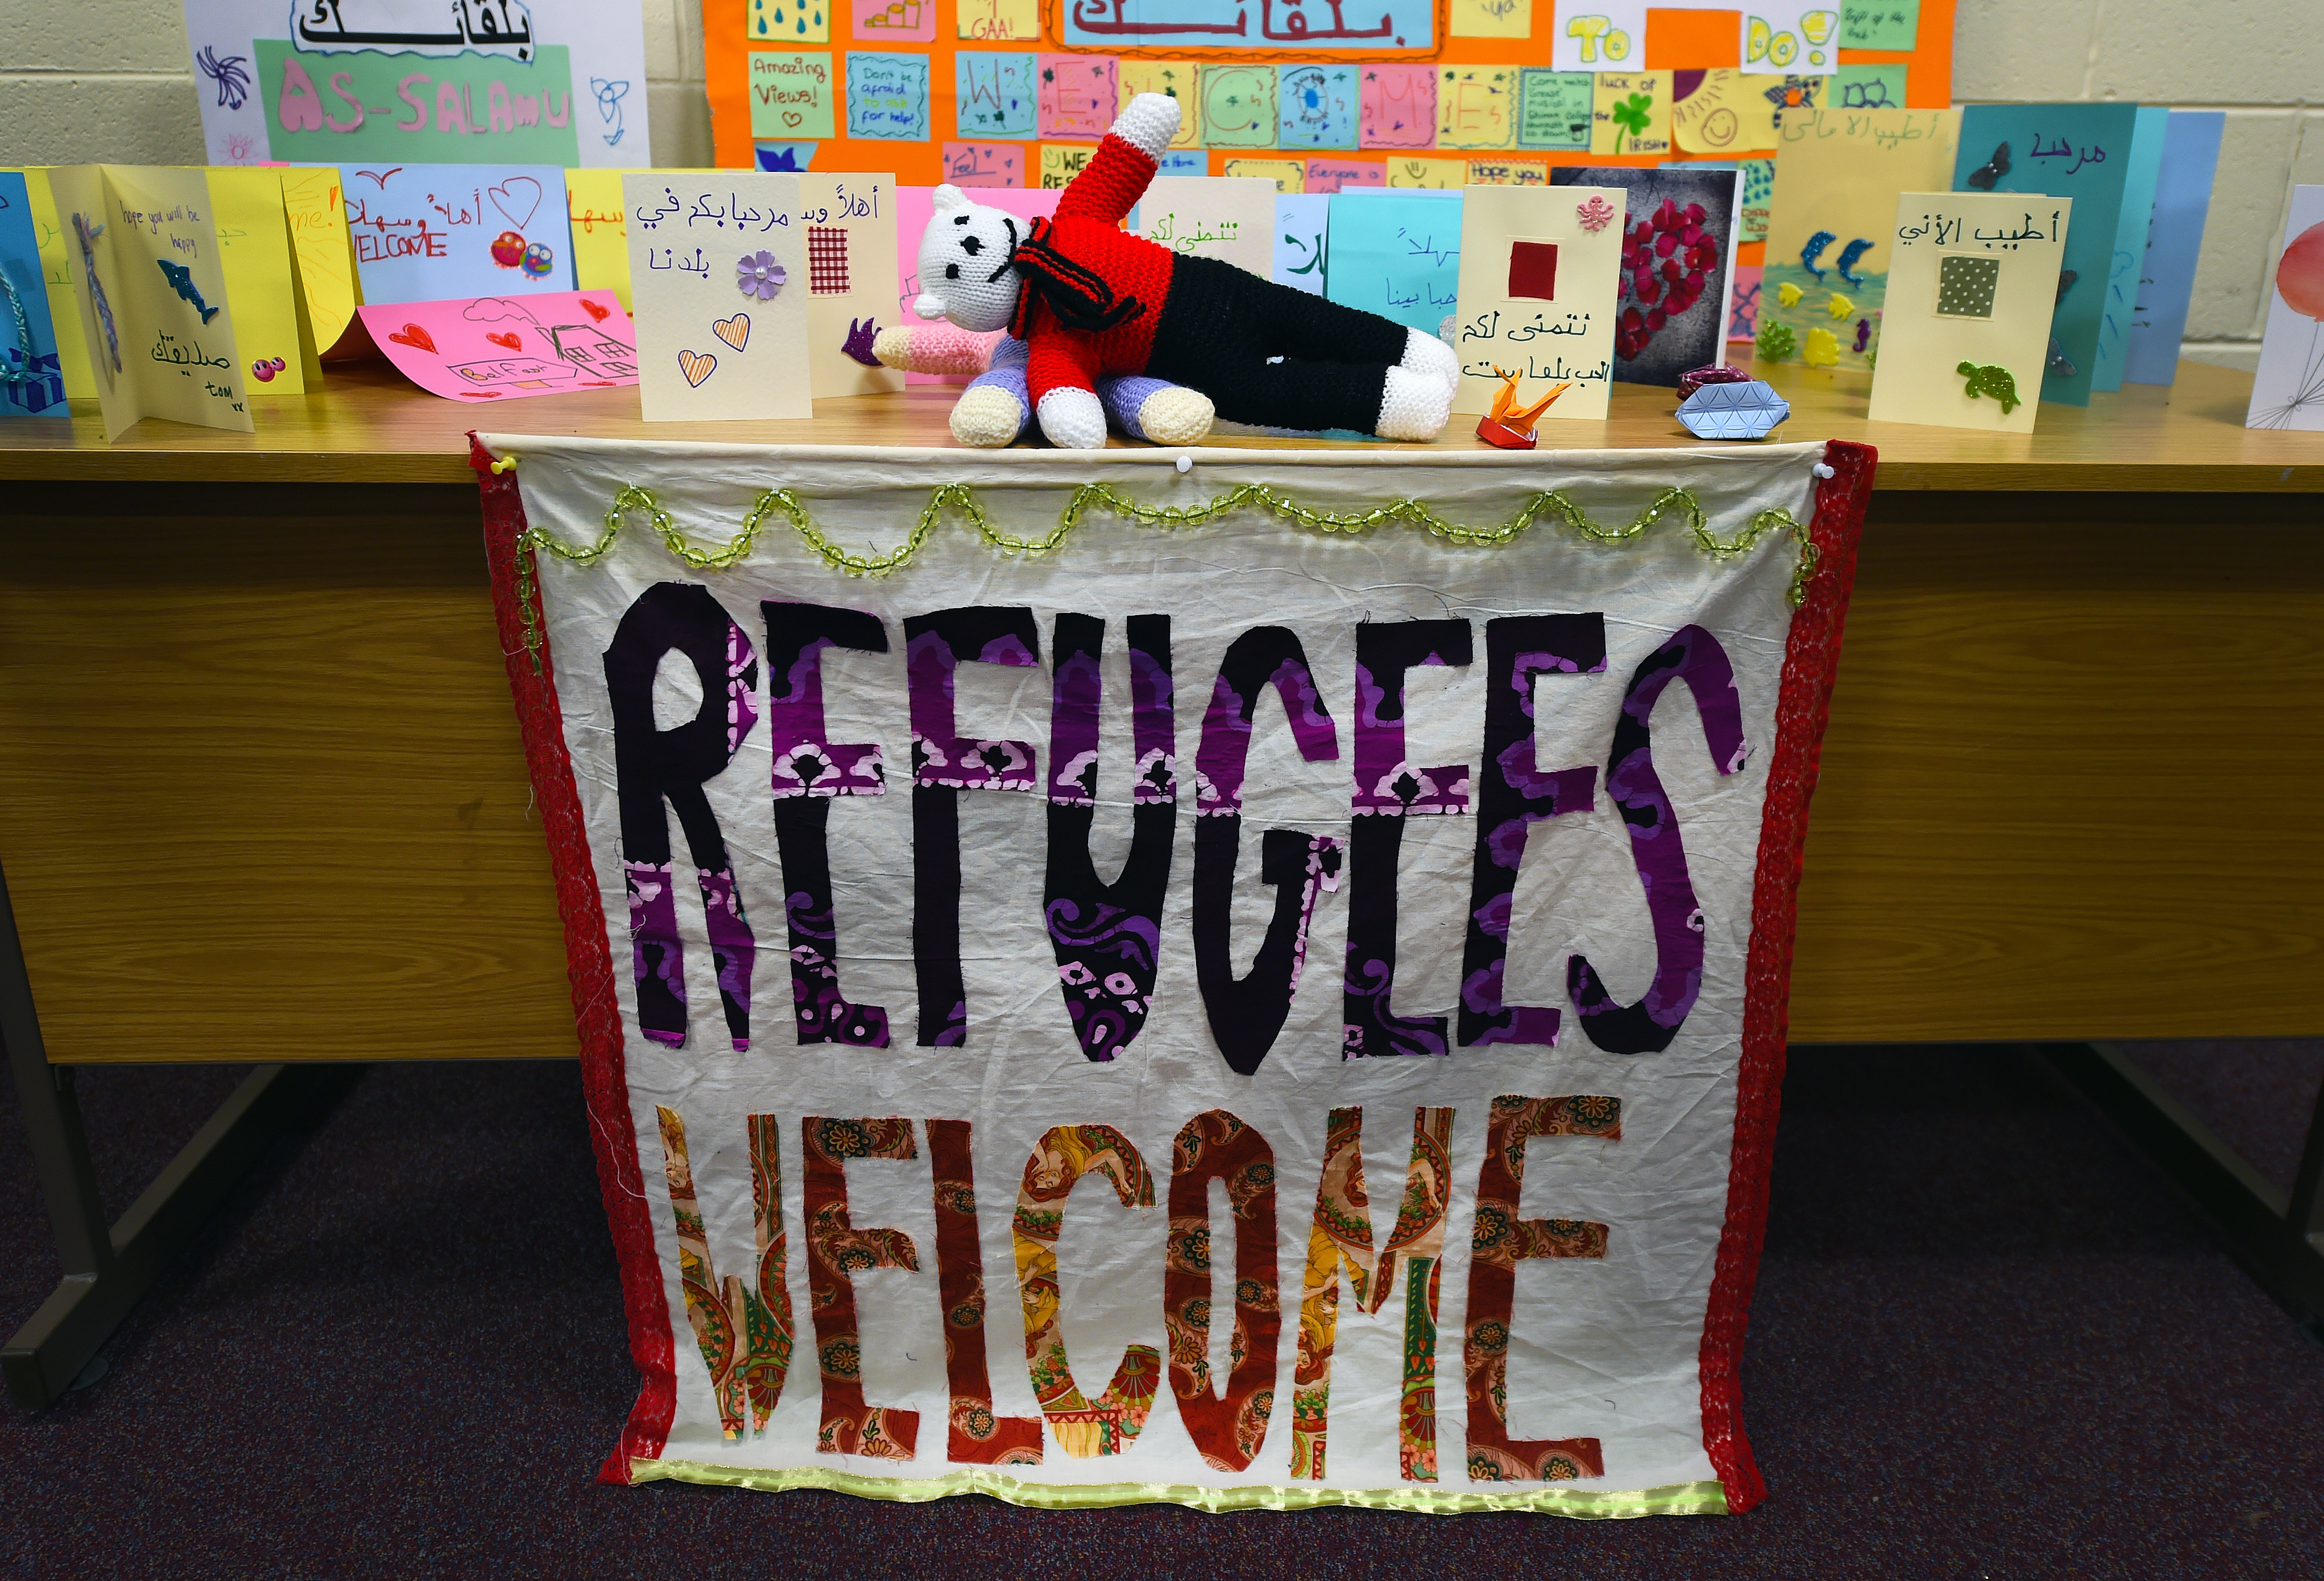 Welcoming cards and posters made by local children await Syrian refugees at an undisclosed location on December 14, 2015 in Belfast, Northern Ireland. (Charles McQuillan—Getty Images)